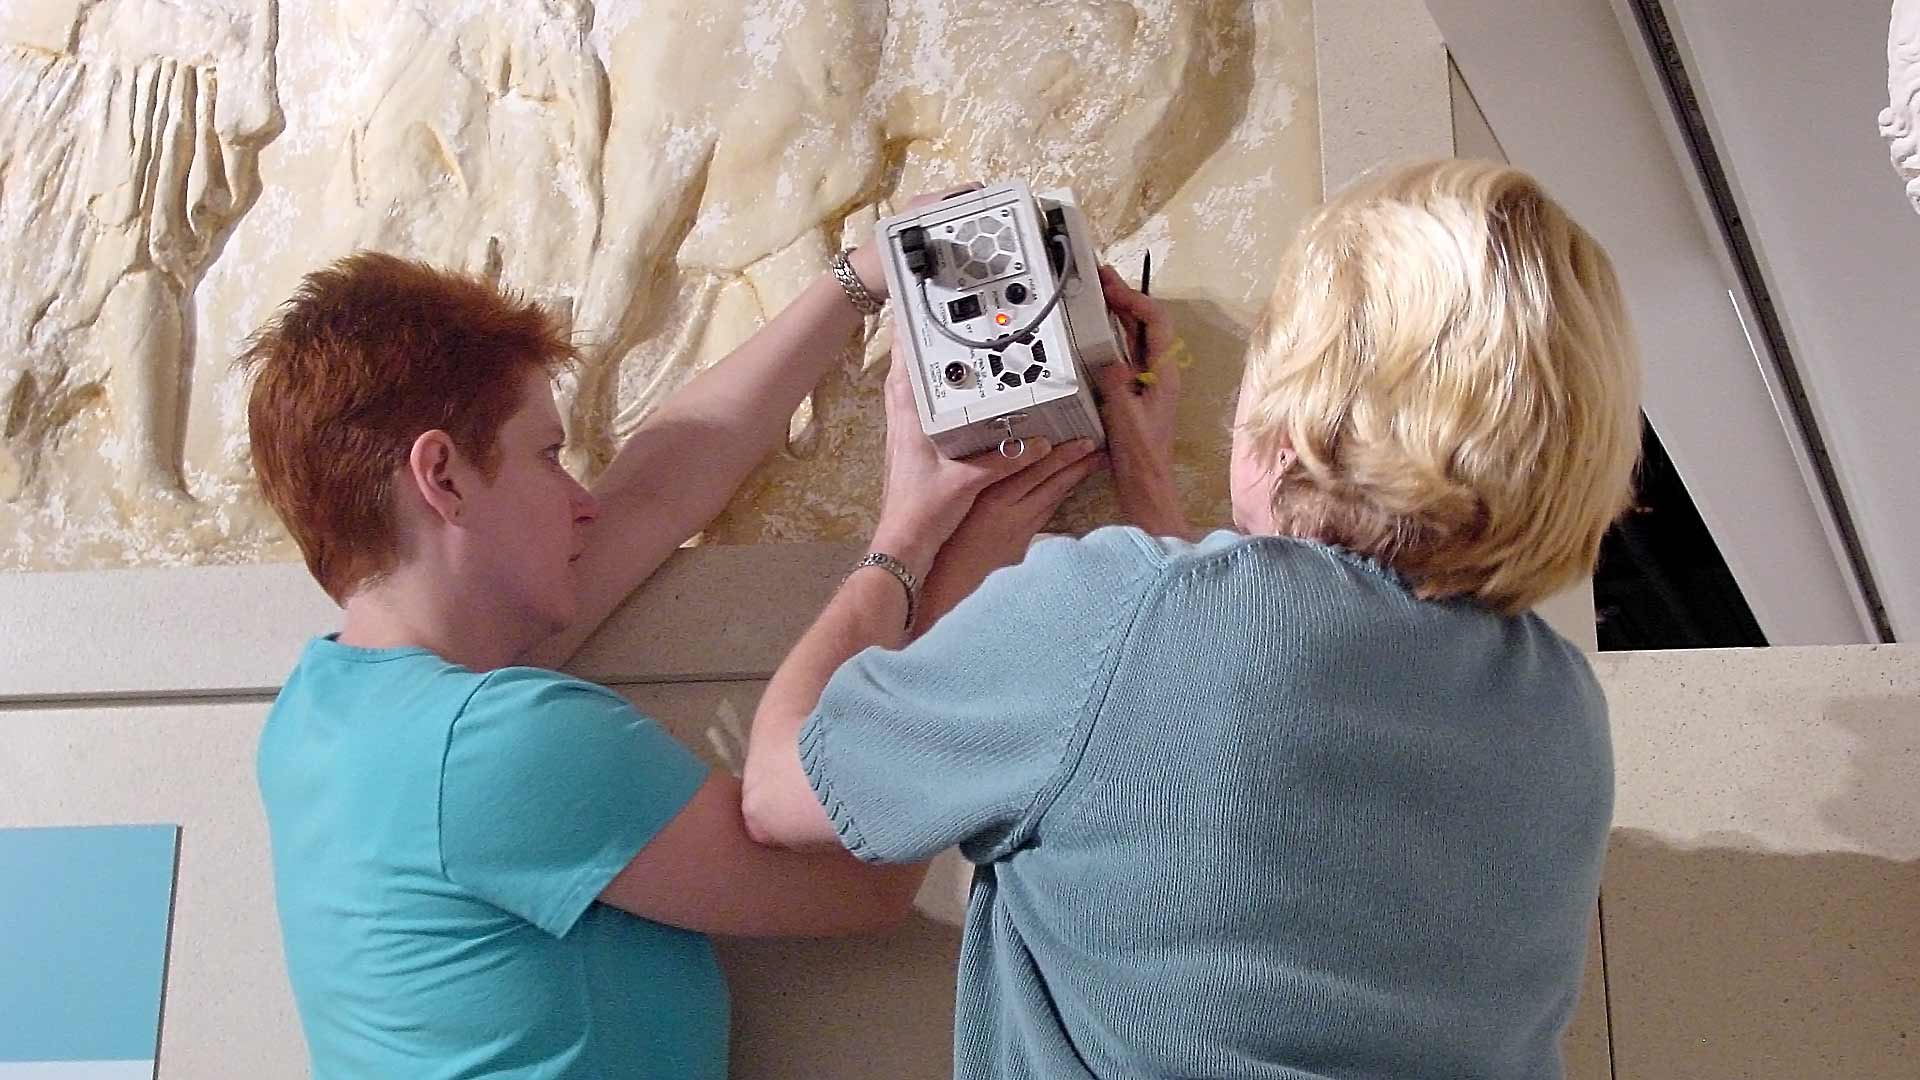 Two women hold a electronic box up to collect a measurement